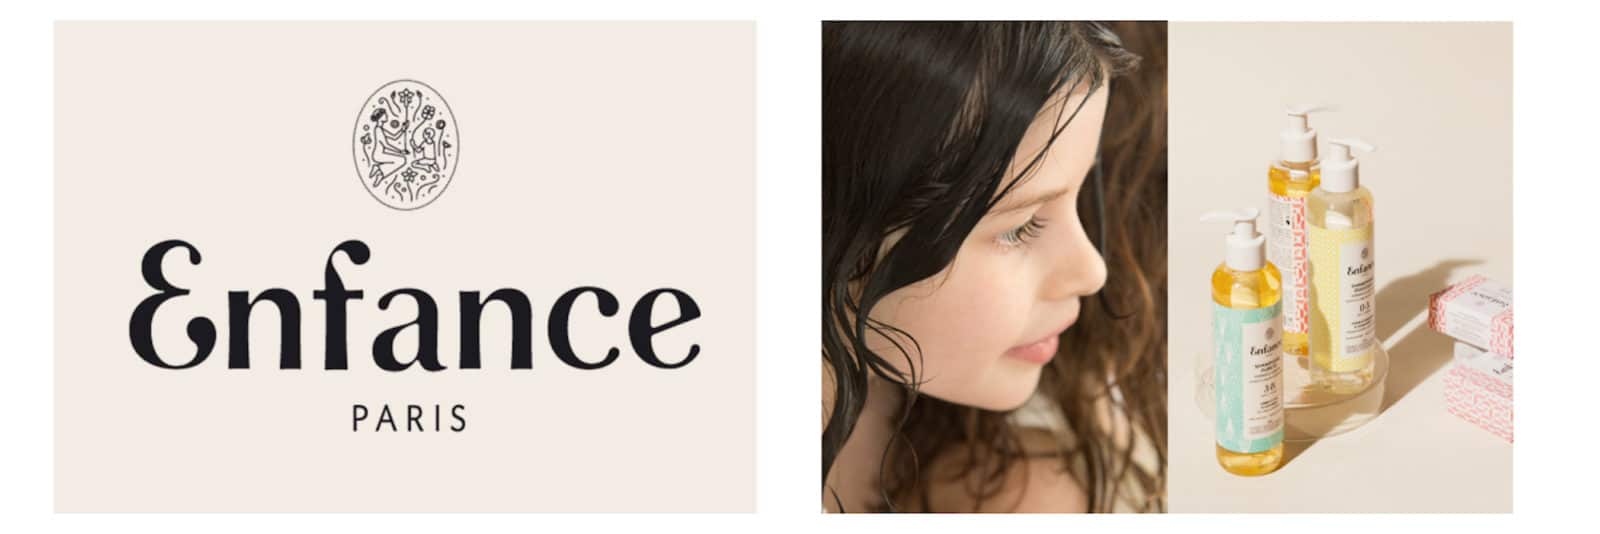 Enfance is a made-in-France organic beauty brand of products for children that mums can use too, available to buy at Oh My Cream! store in Paris (left). Profile of young girl and bottles of Enfance natural shampoos (right).